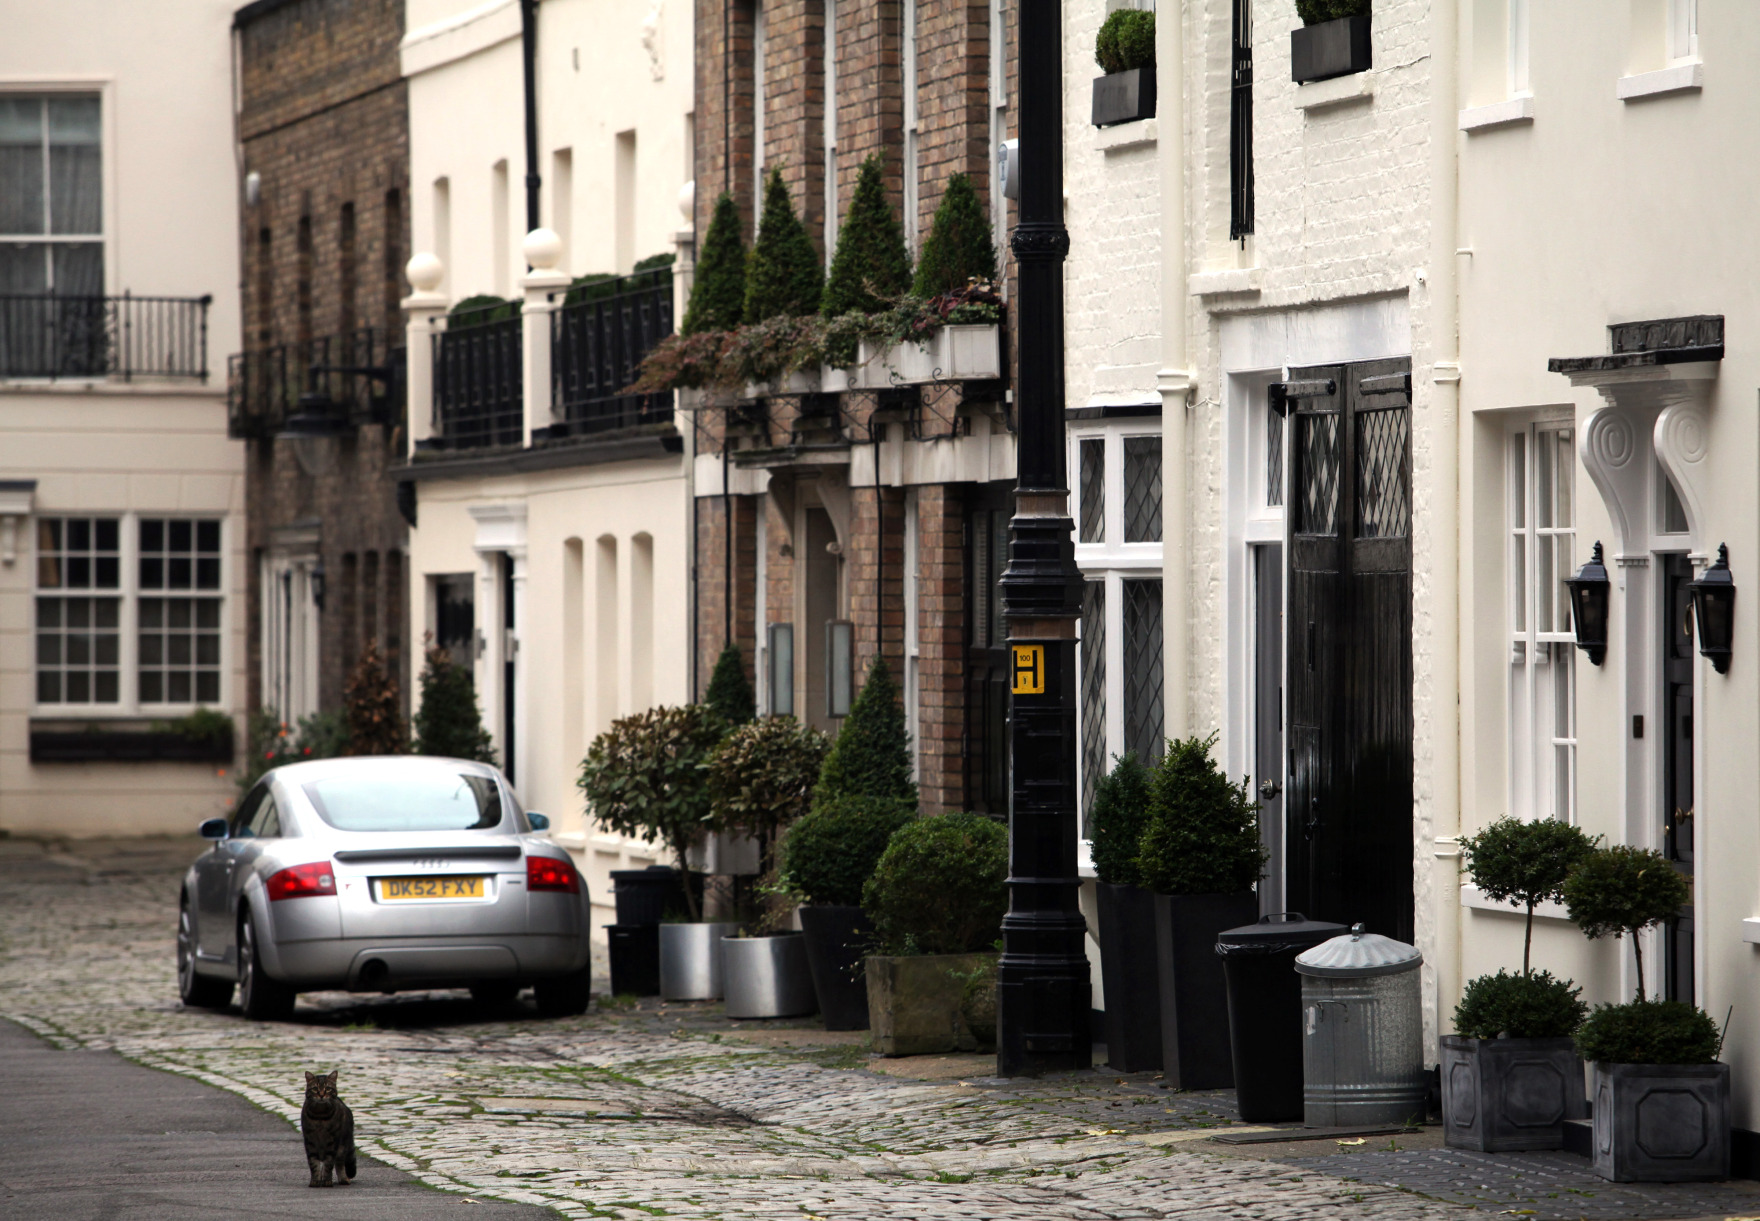 A row of mews houses in the London area of Belgravia.